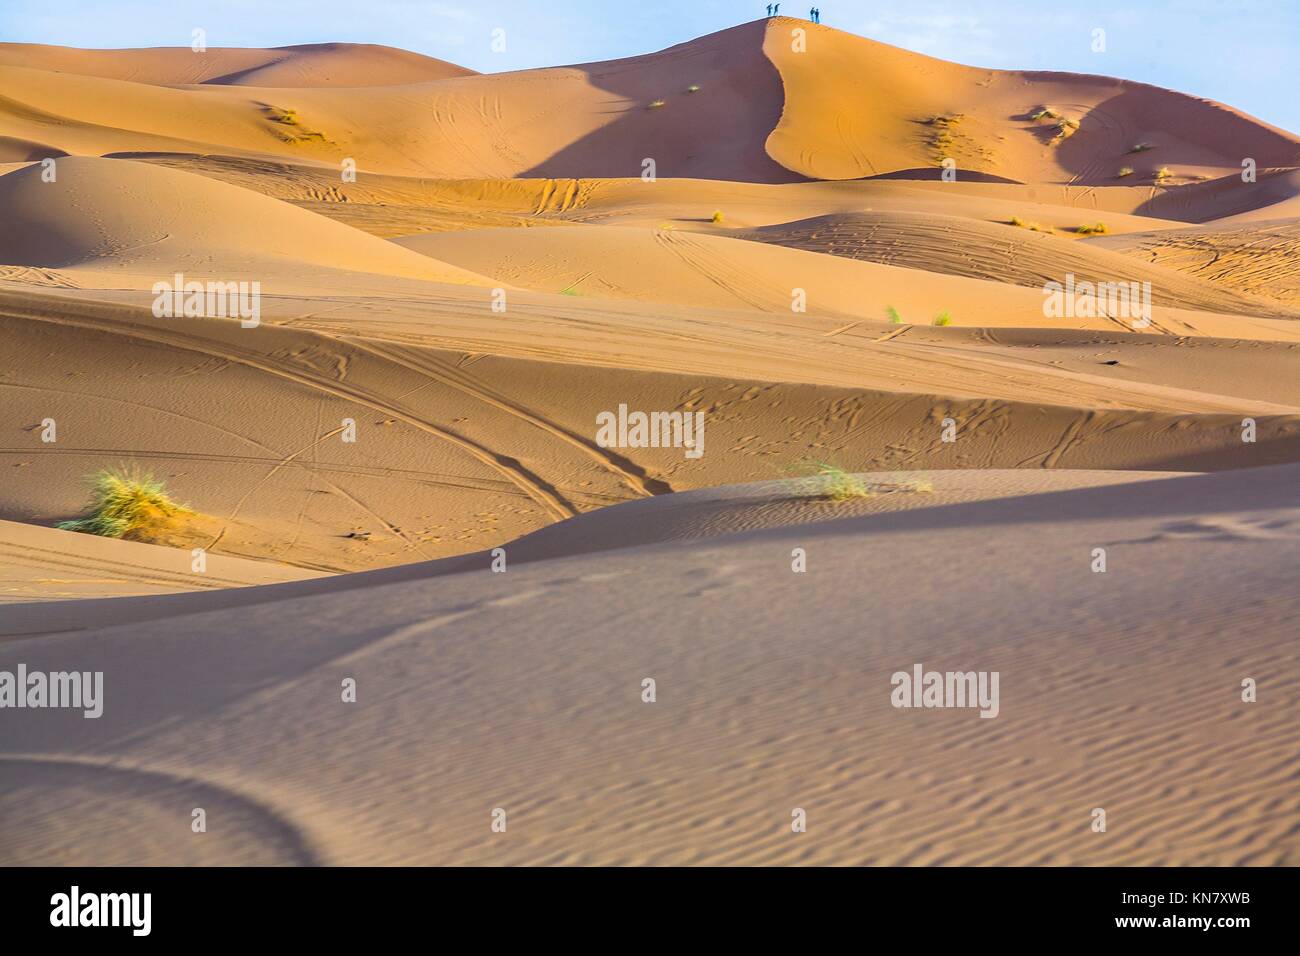 People admire the sunrise from a hill. Several sand hill at Erg Chebbi in the Sahara desert. Ers are large dunes formed by wind-blown sand. Stock Photo